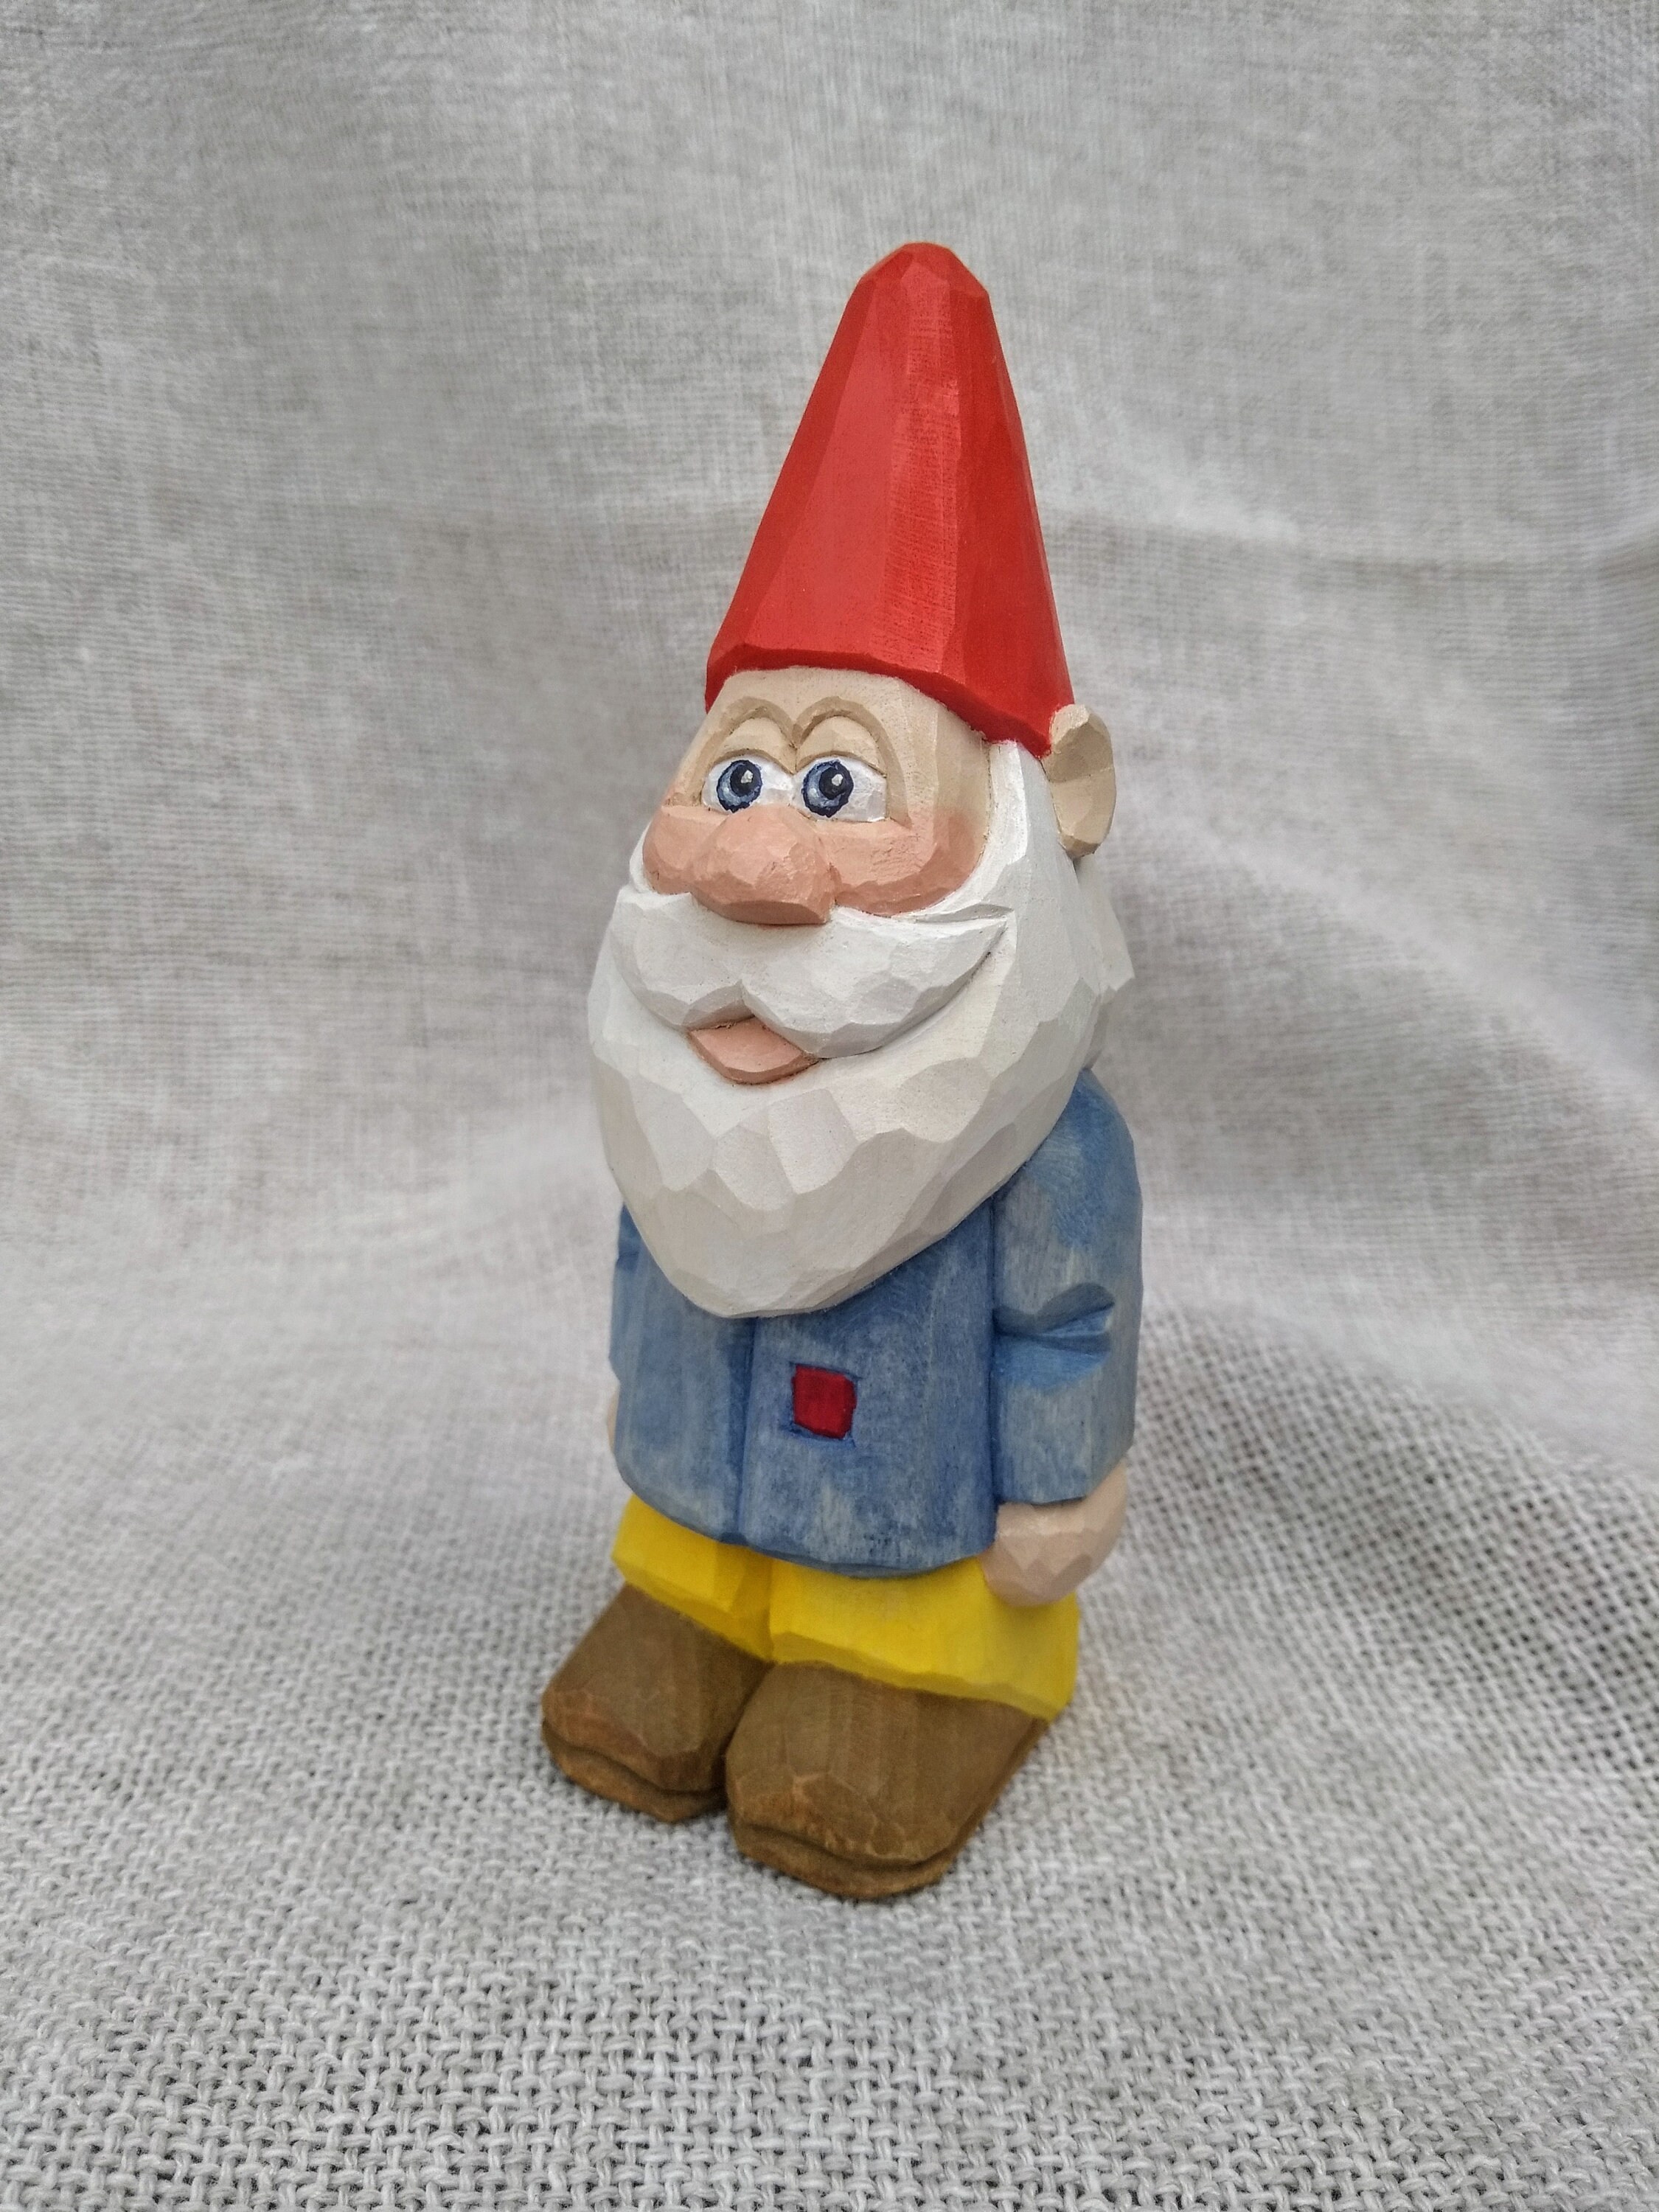 Got a stamp carving kit for Christmas so had to make a gnome : r/Carving